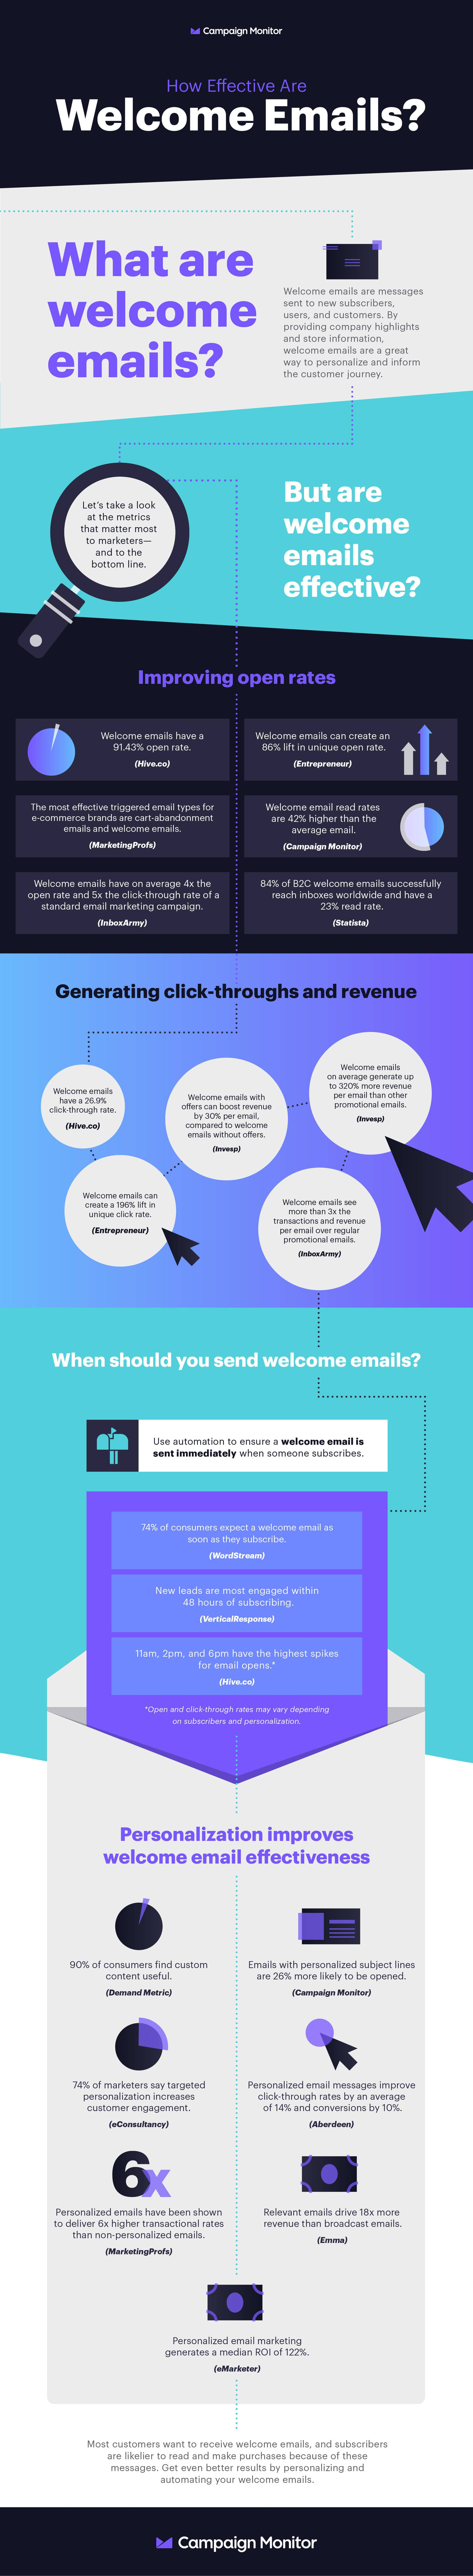 how effective are welcome emails infographic - welcome mail stats and welcome email statistics